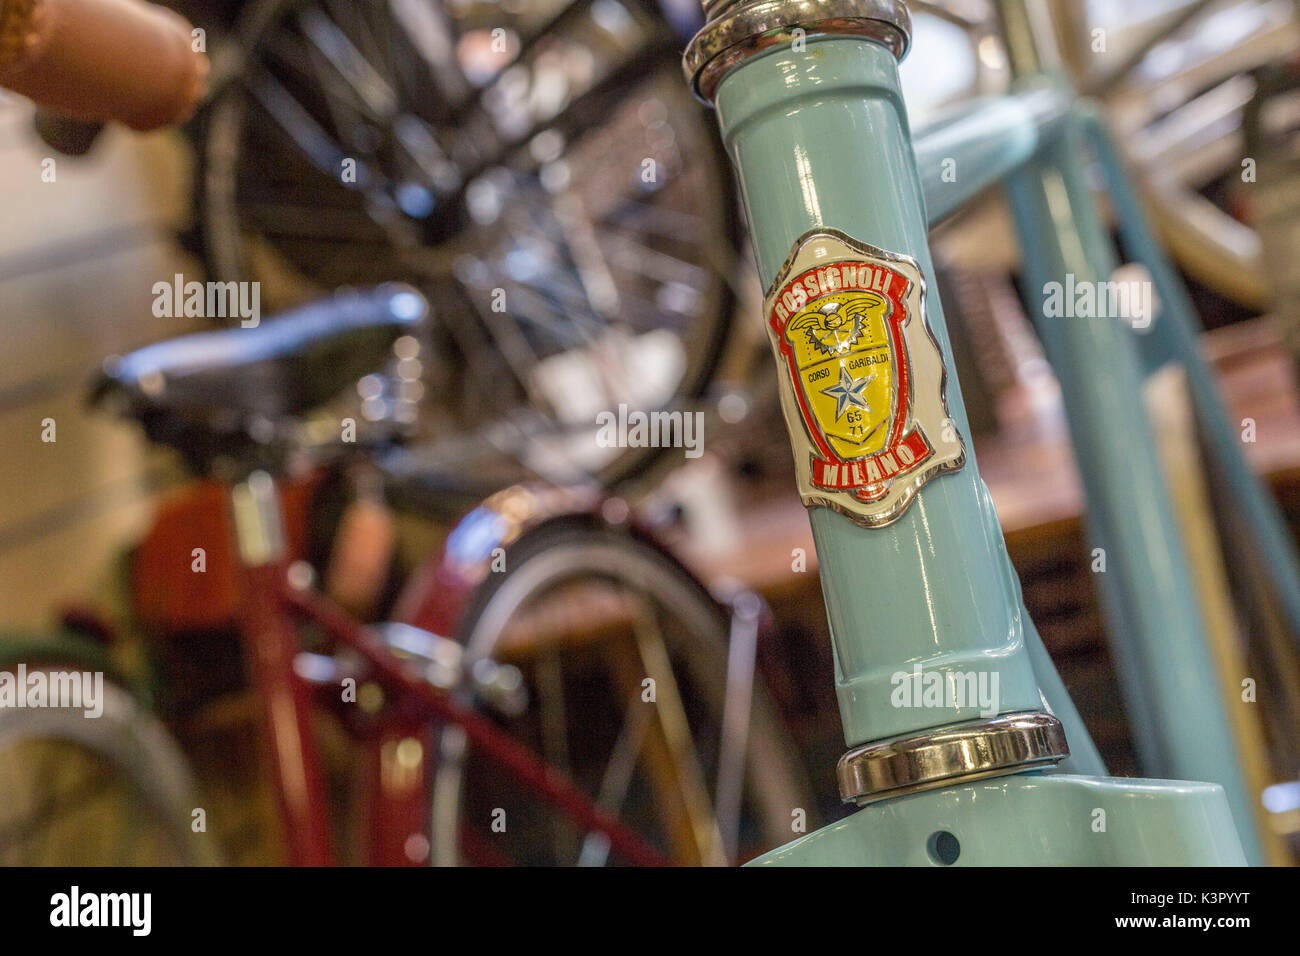 Details and mechanical parts in the Rossignoli bike shop an icon of Milan Lombardy Italy Europe Stock Photo